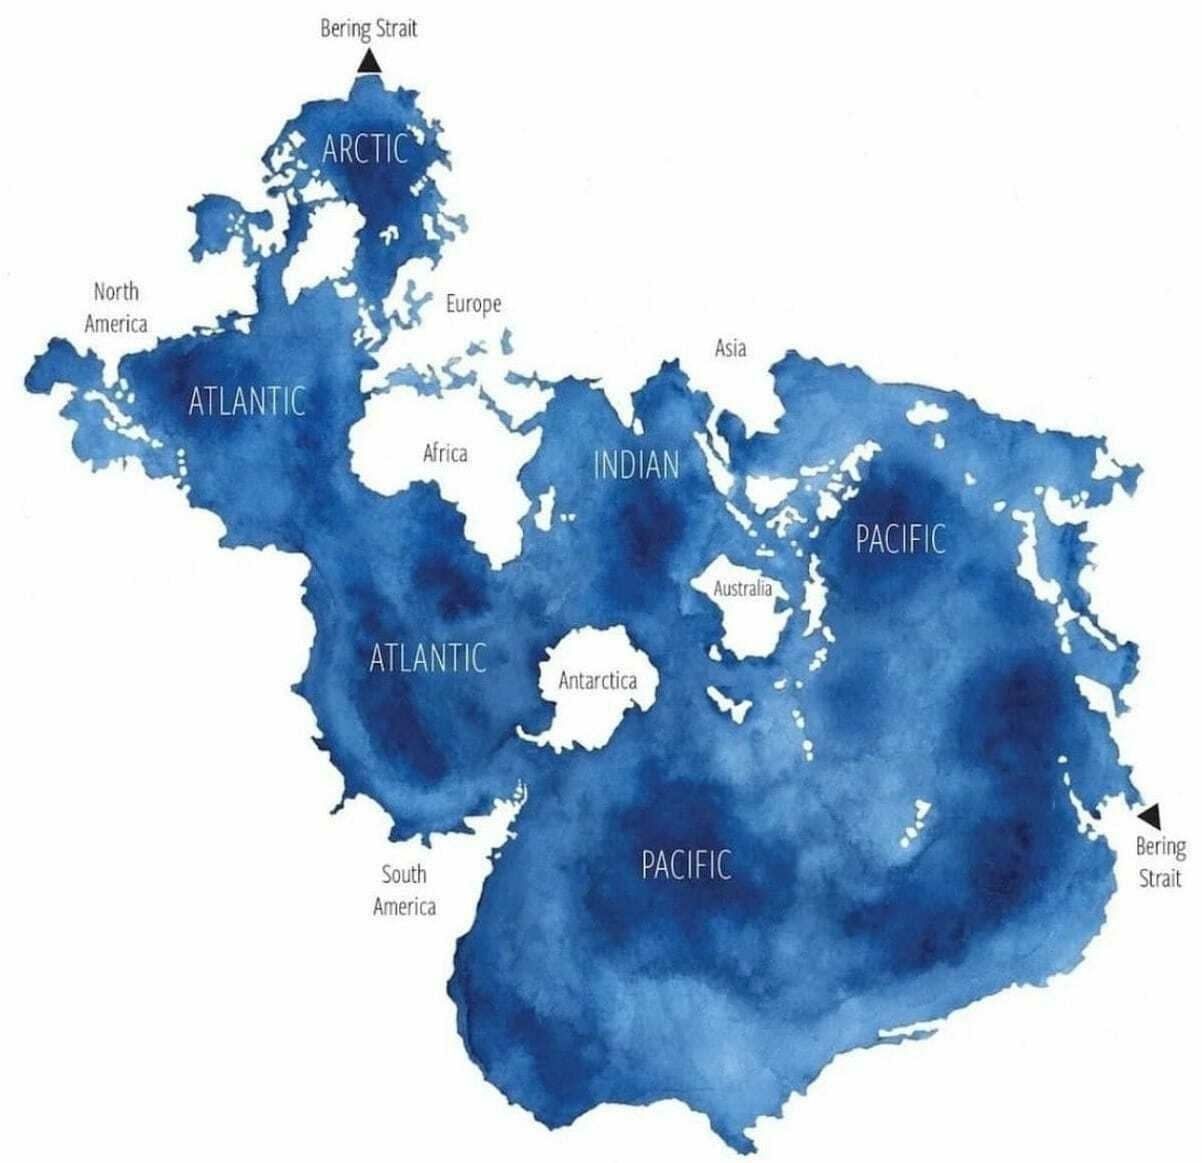 A watercolour image showing how all of the world's oceans are connected